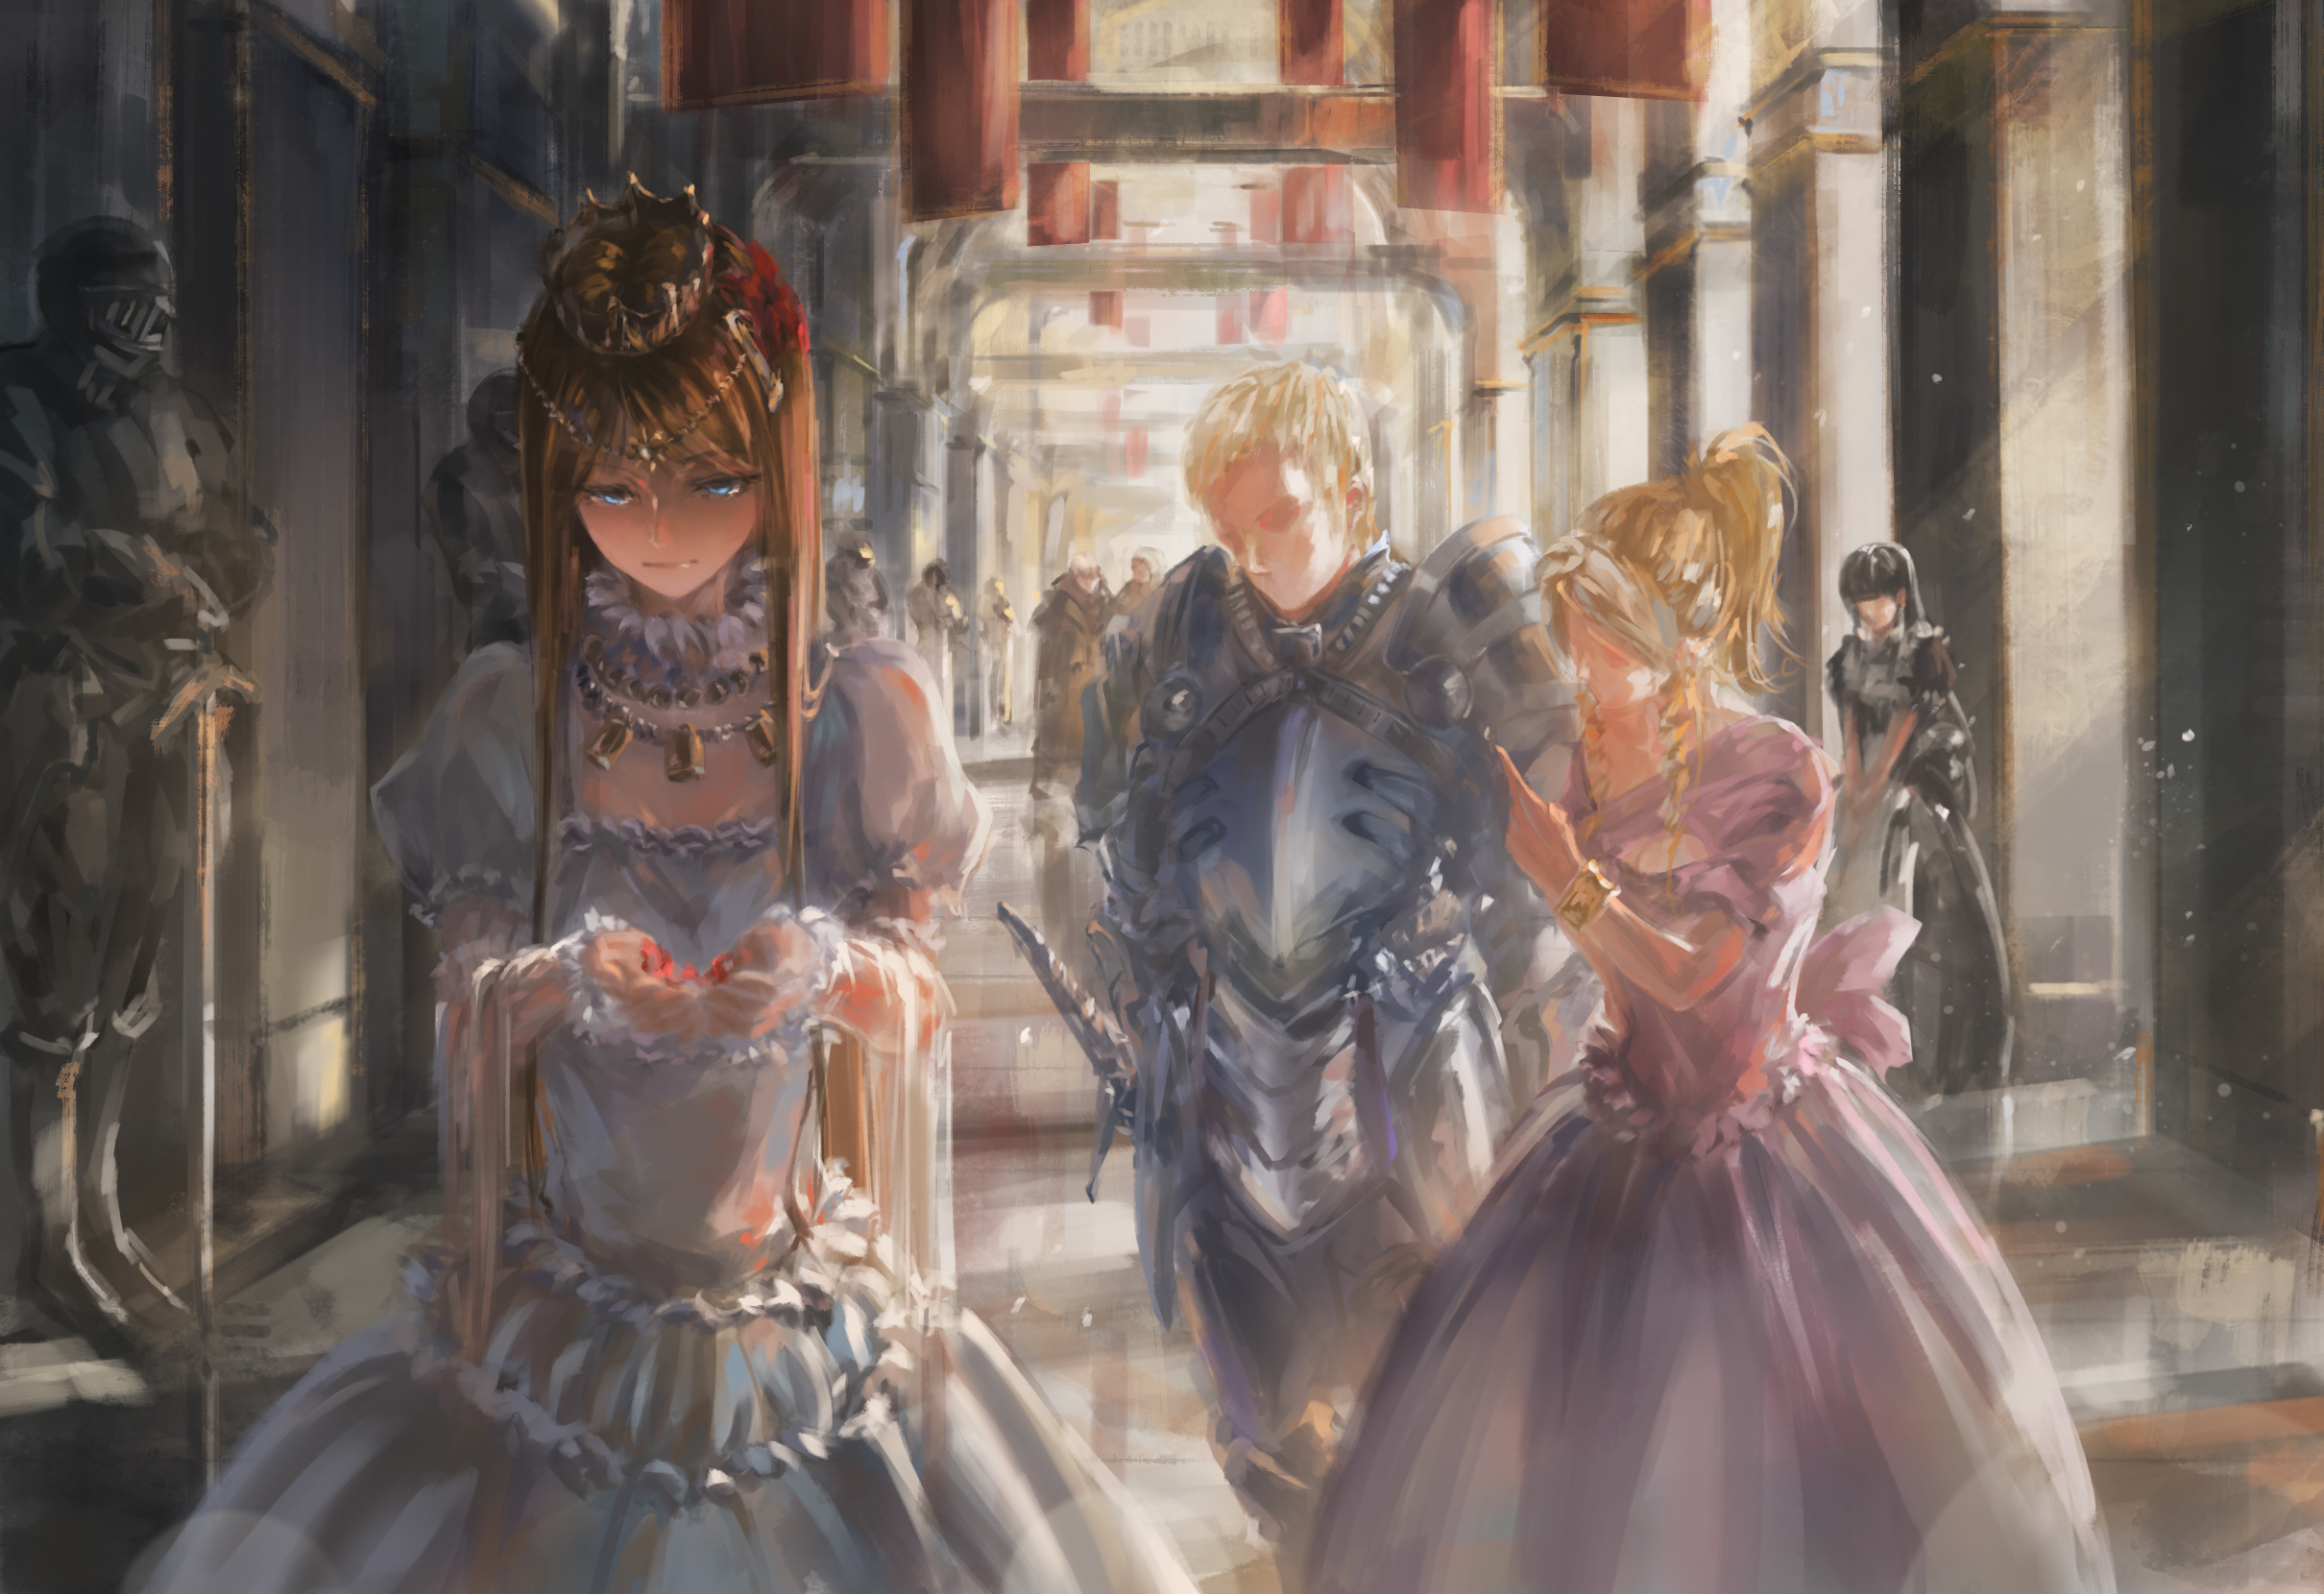 Overlord Anime Palace Fantasy Armor Maid Pink Dress White Dress Princess Crown Blue Eyes Jewelry Red 2420x1660